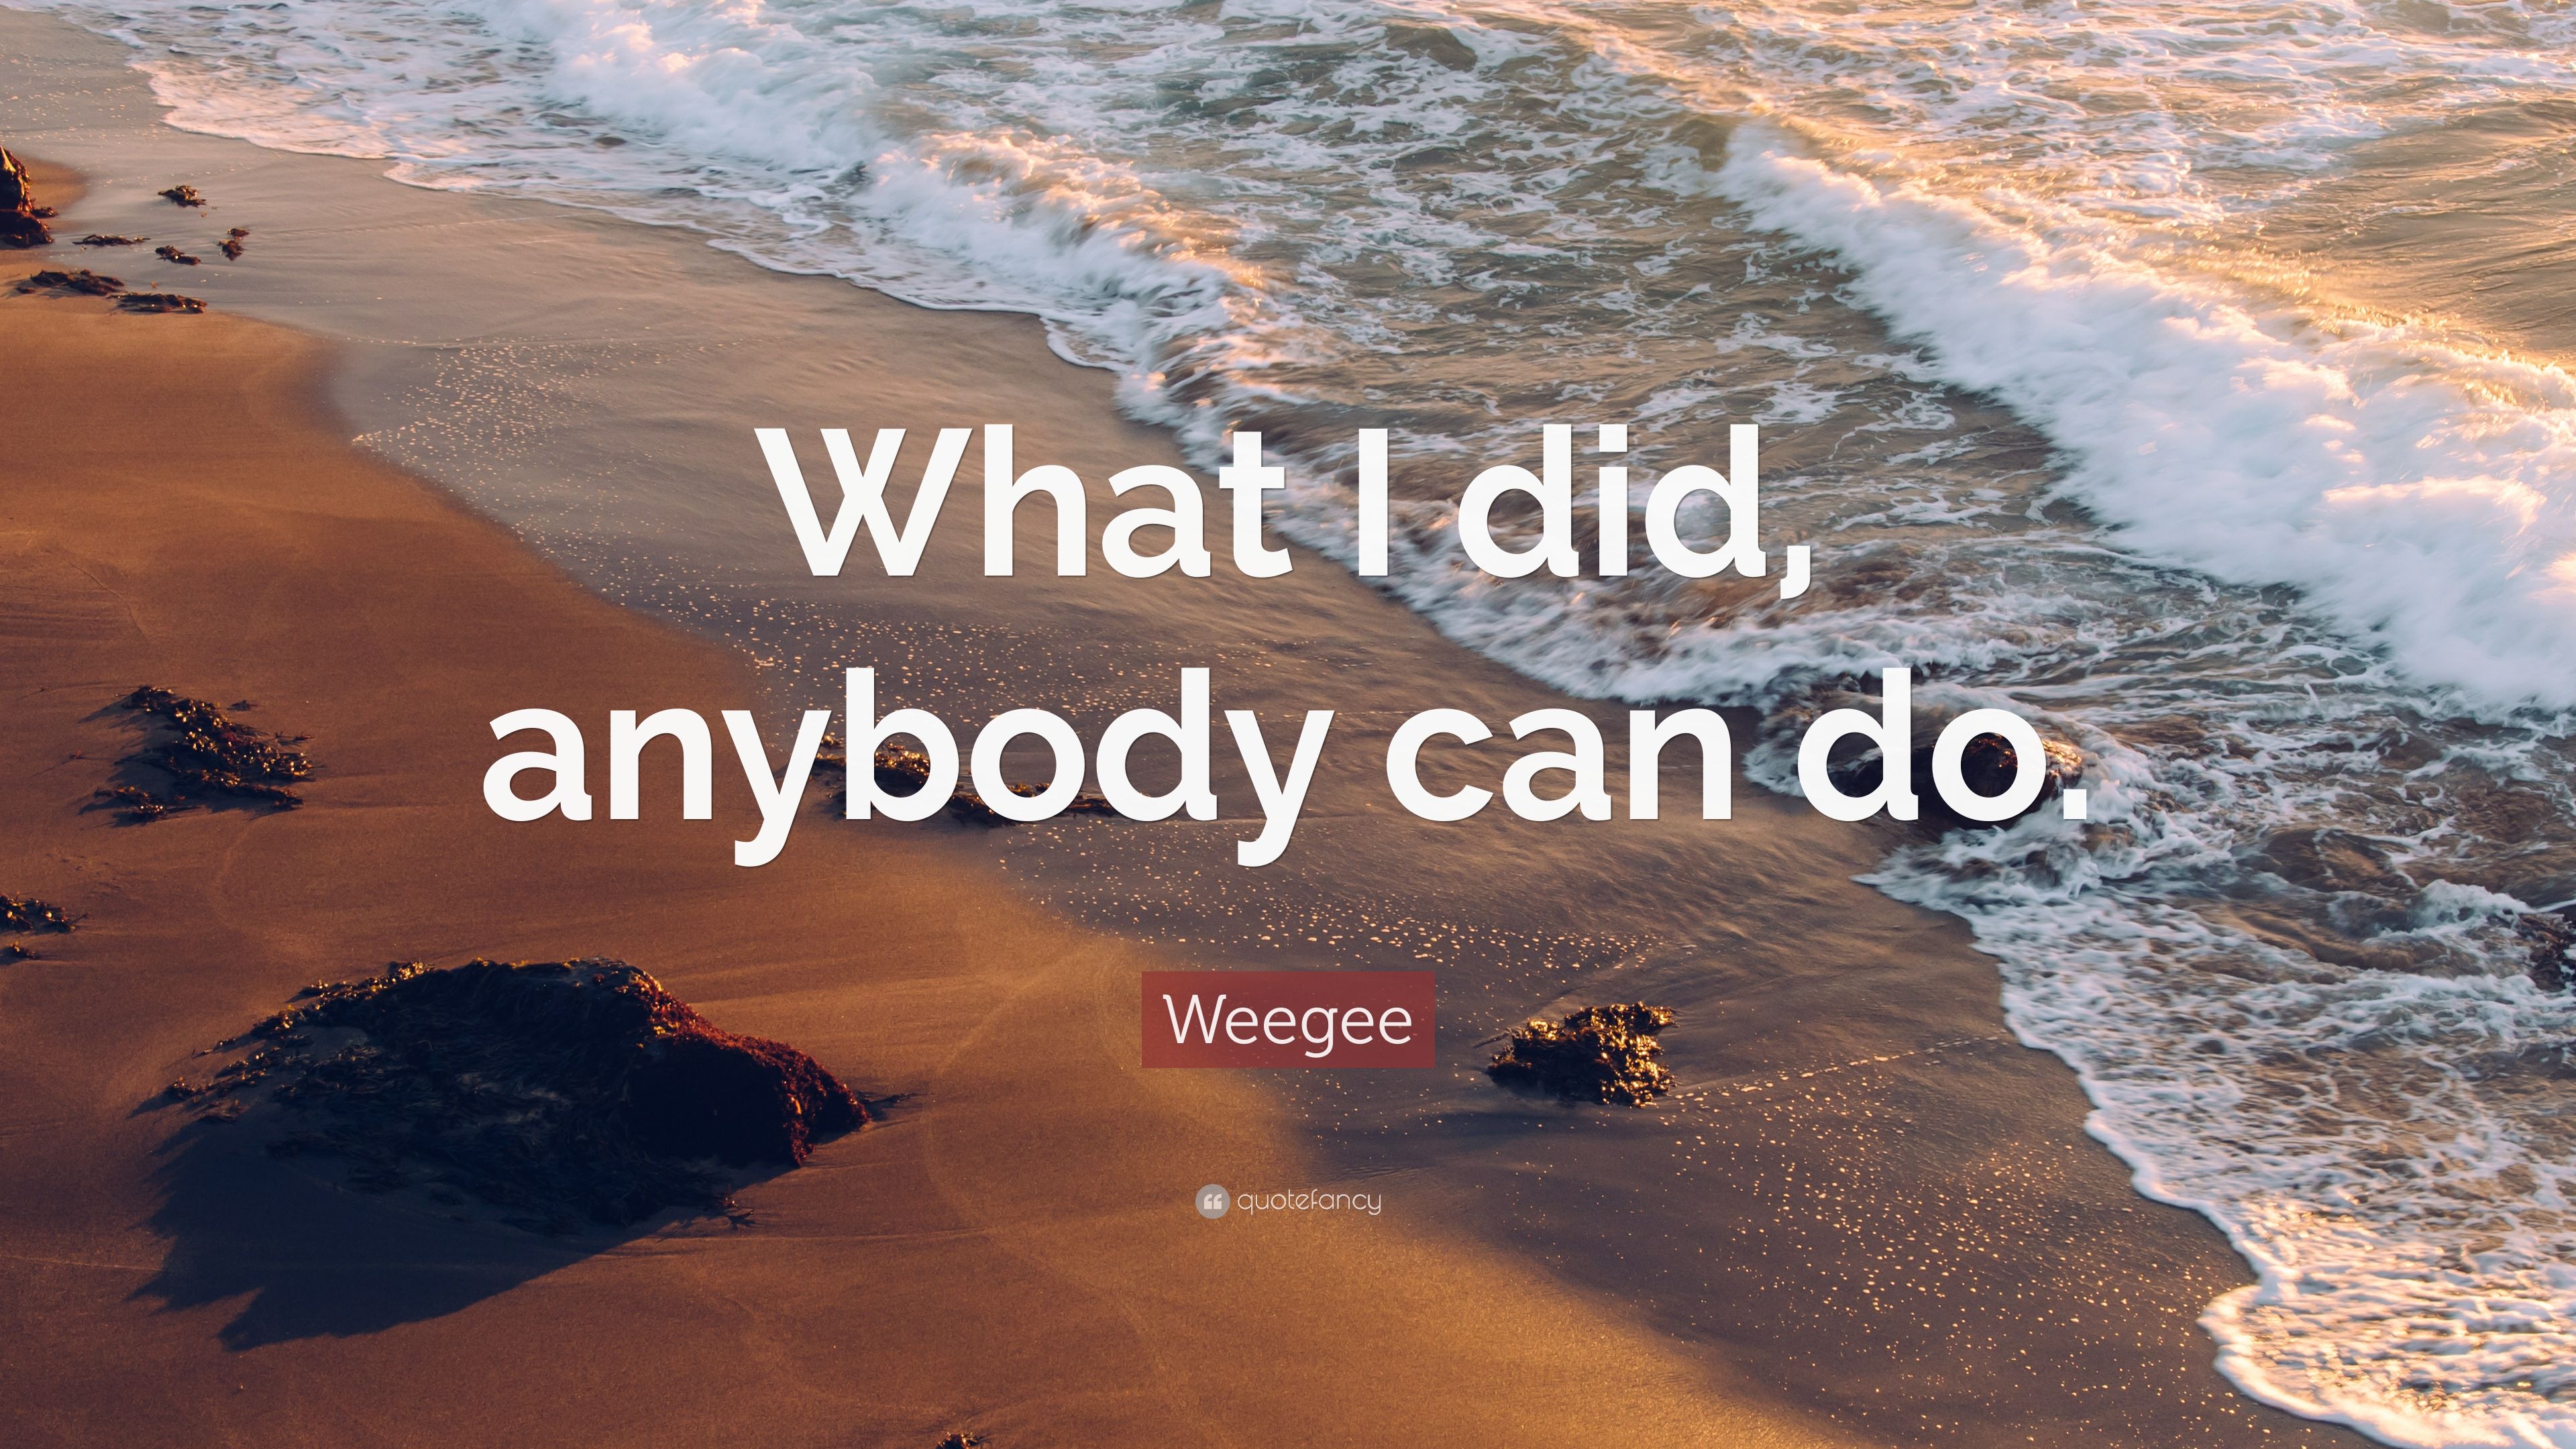 Weegee Quote: “What I did, anybody can do.” 7 wallpaper